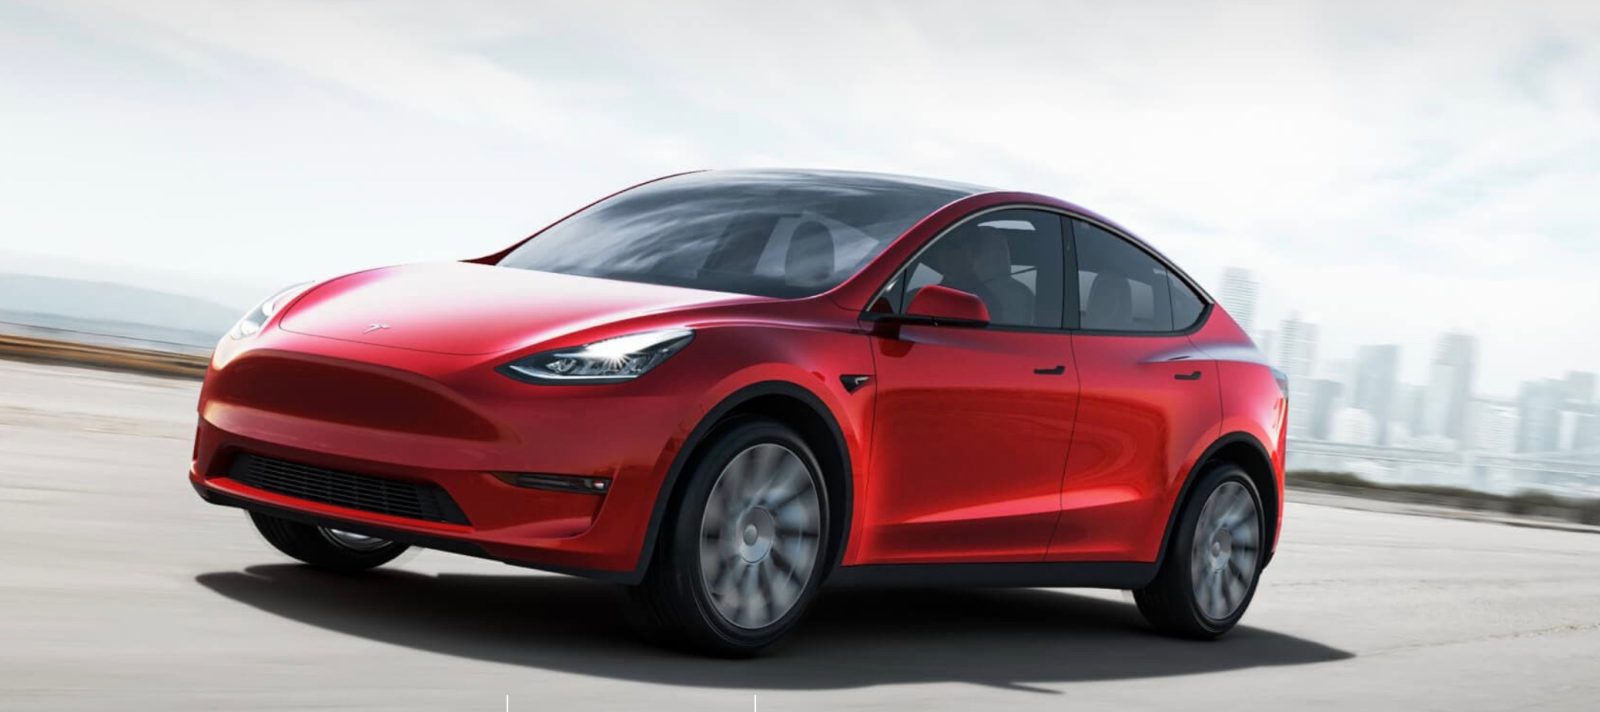 Tesla Model Y is now the world’s best-selling car, first EV to do so